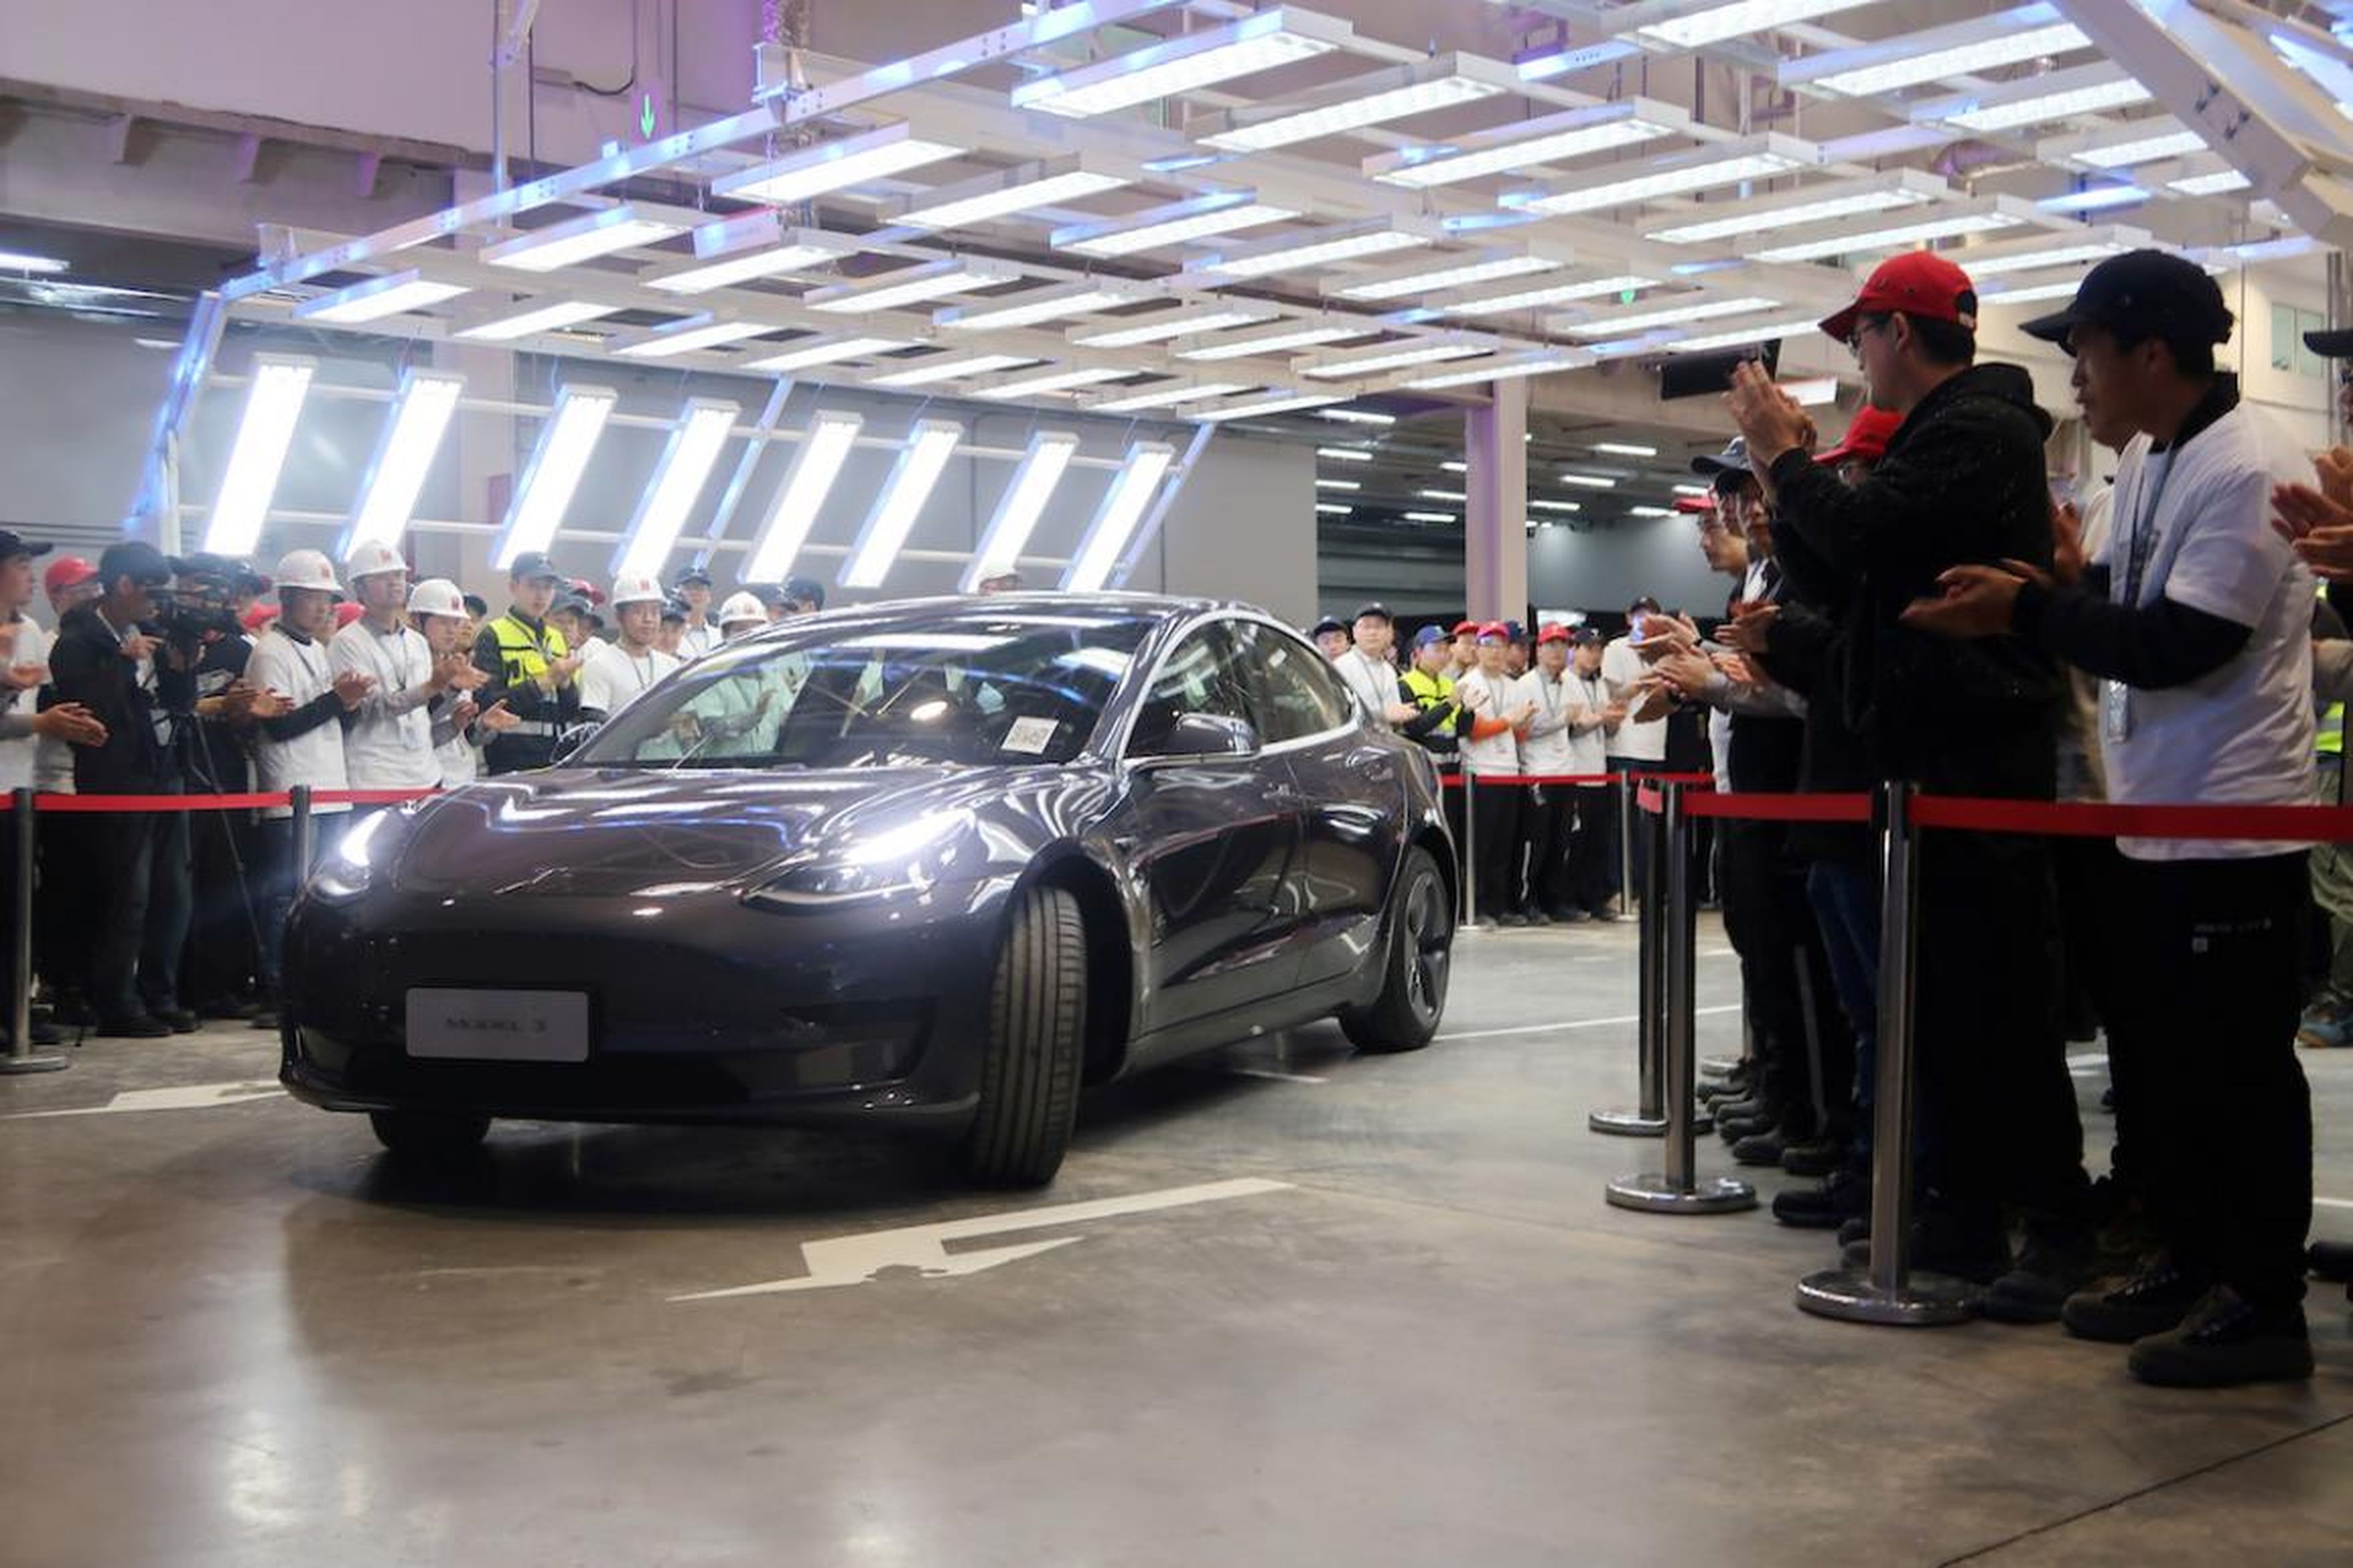 In China, Tesla has offered racing events and showroom parties to drum up demand for its electric vehicles, and Monday's event was no exception — a big shift from its US approach.